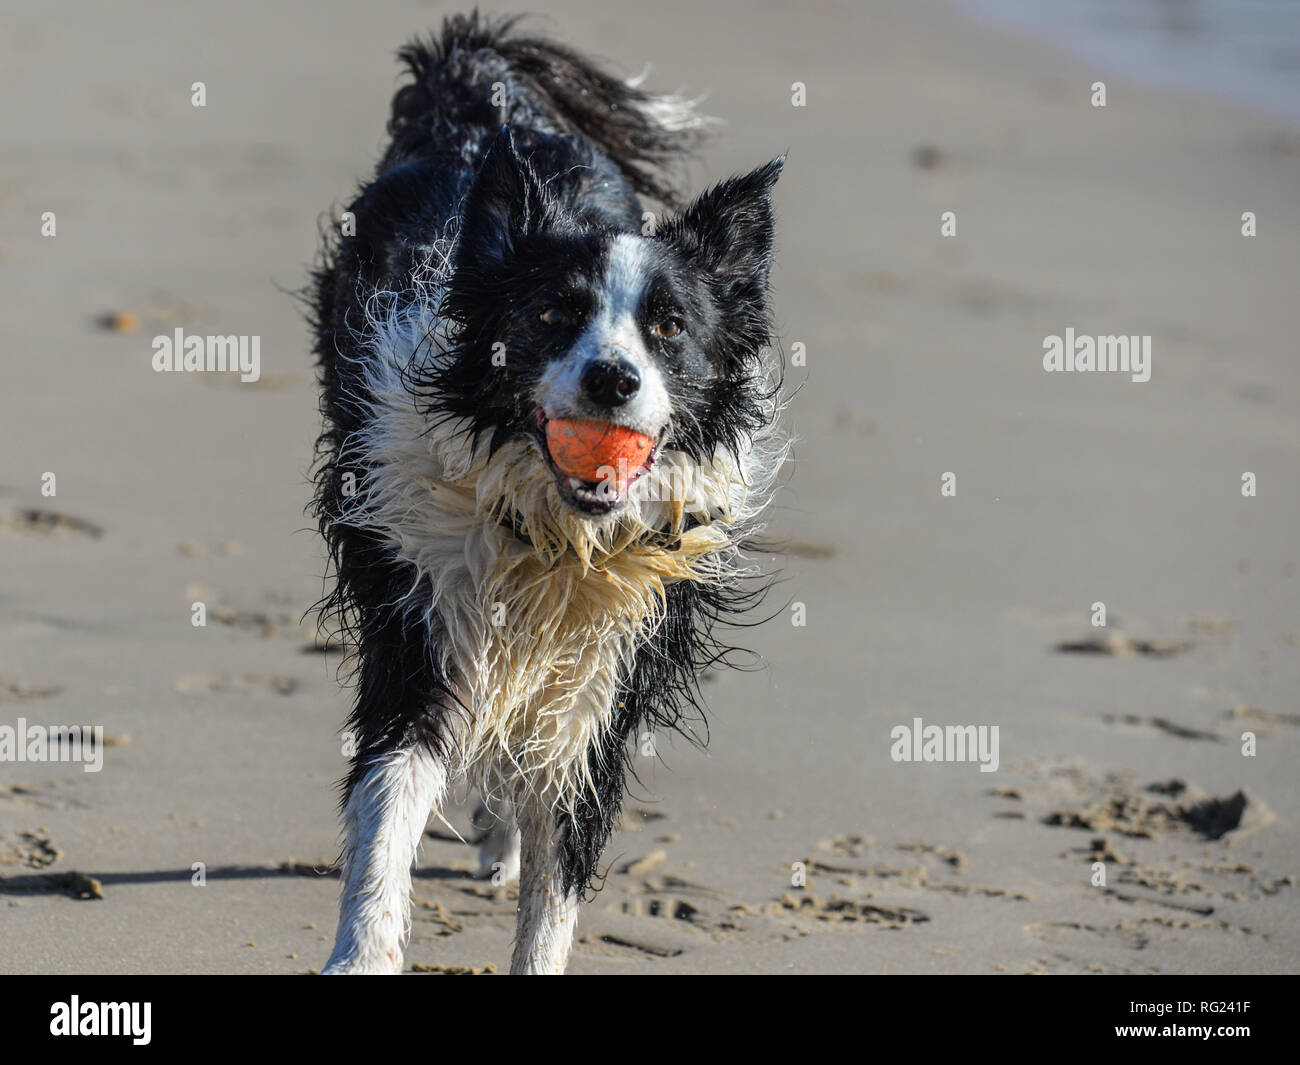 Border Collie dog on a beach, wet from the sea, playing a game of fetch with an orange ball. Stock Photo